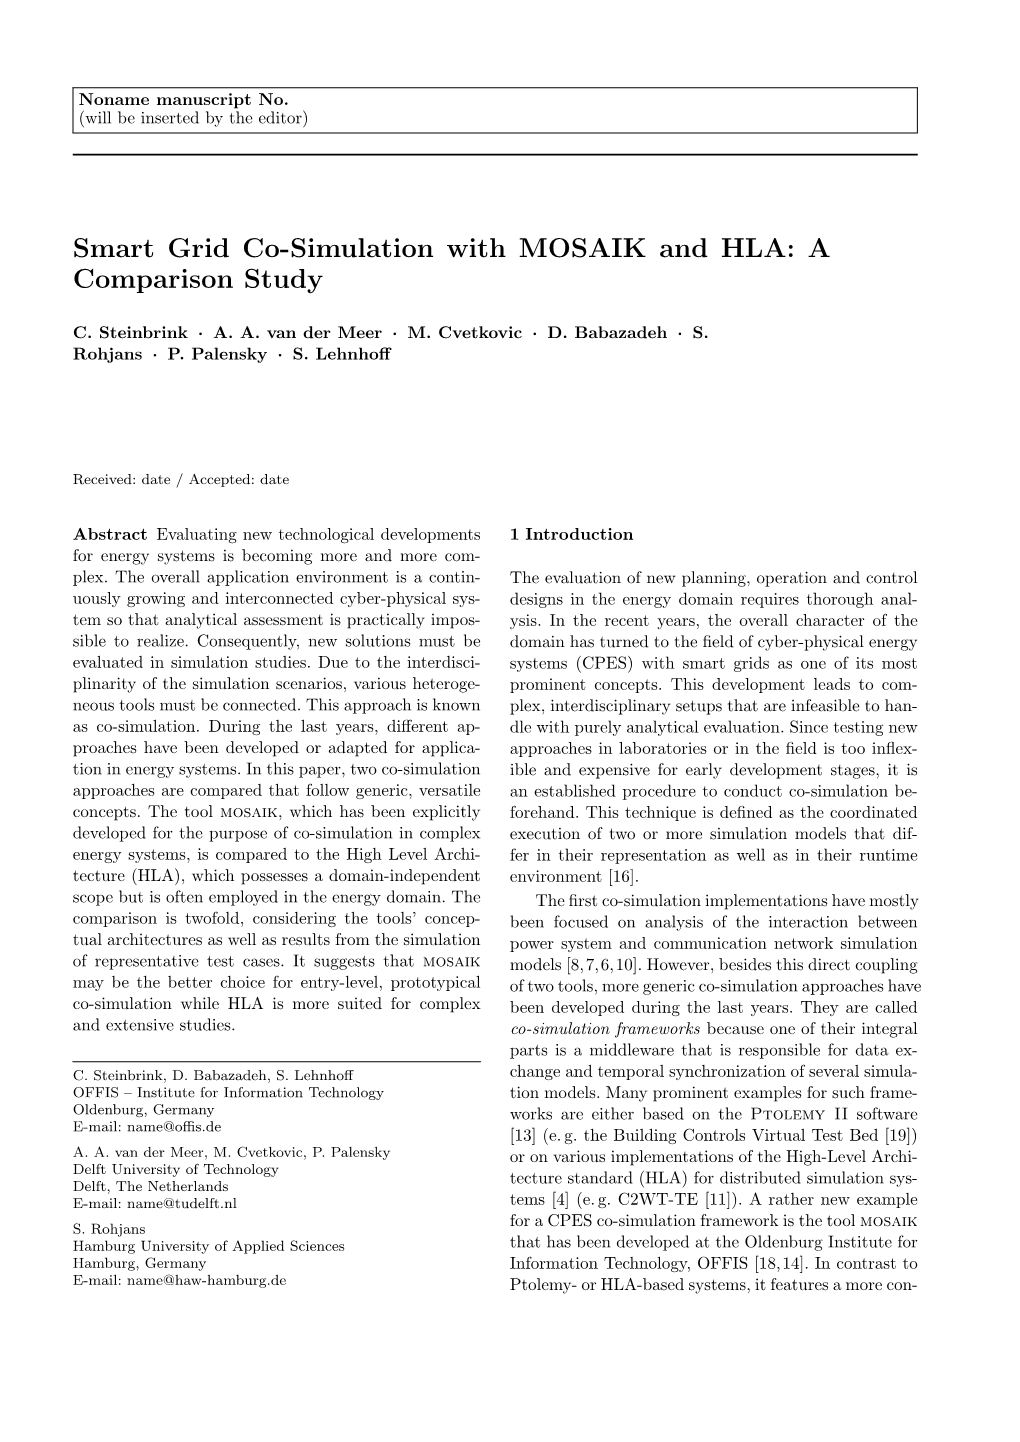 Smart Grid Co-Simulation with MOSAIK and HLA: a Comparison Study